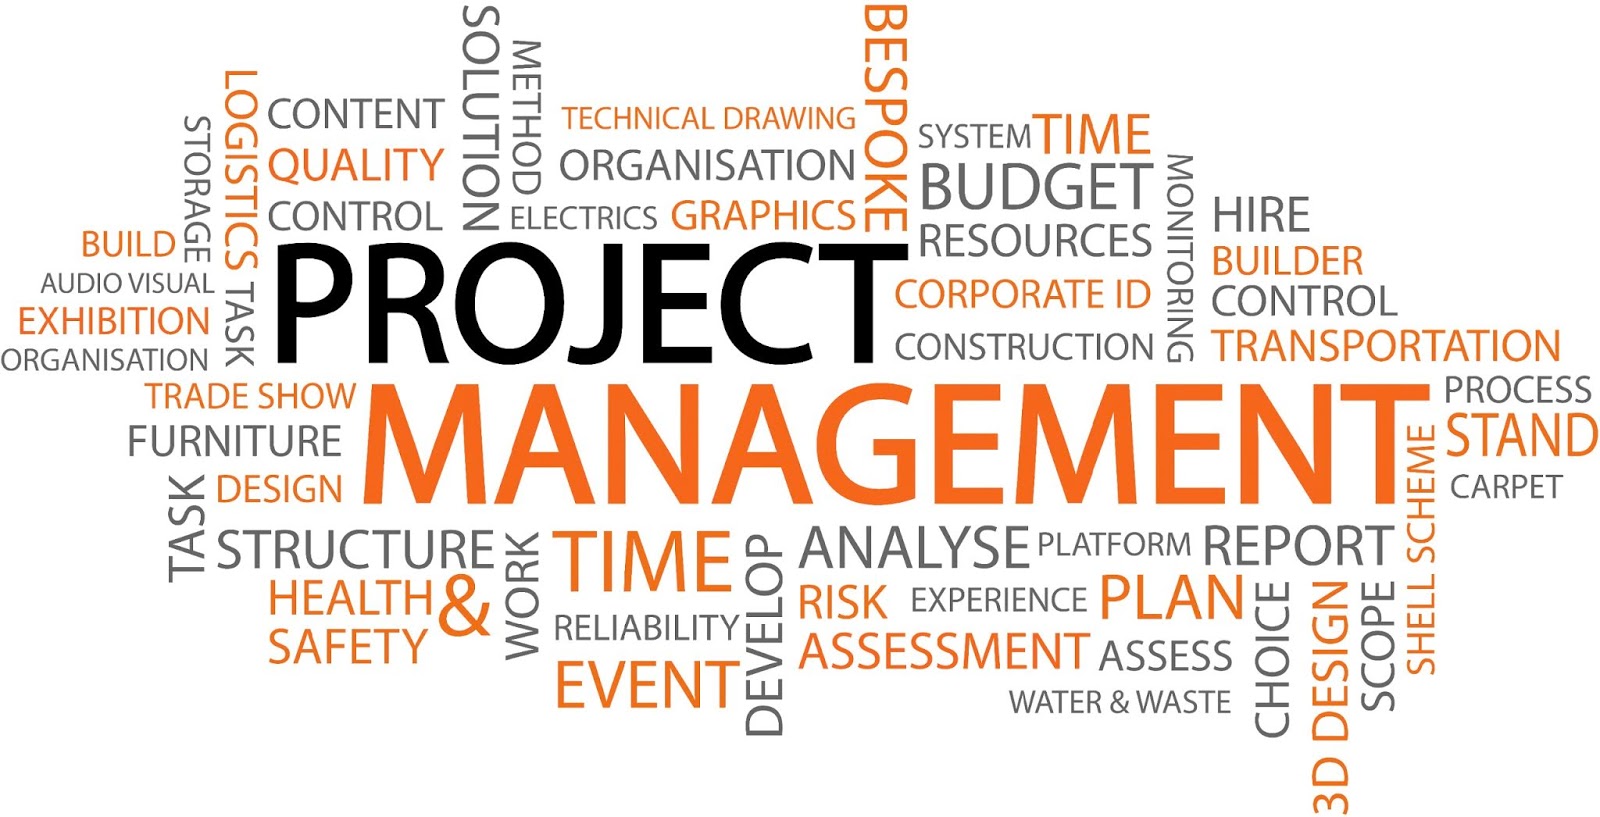 thesis on project management practices